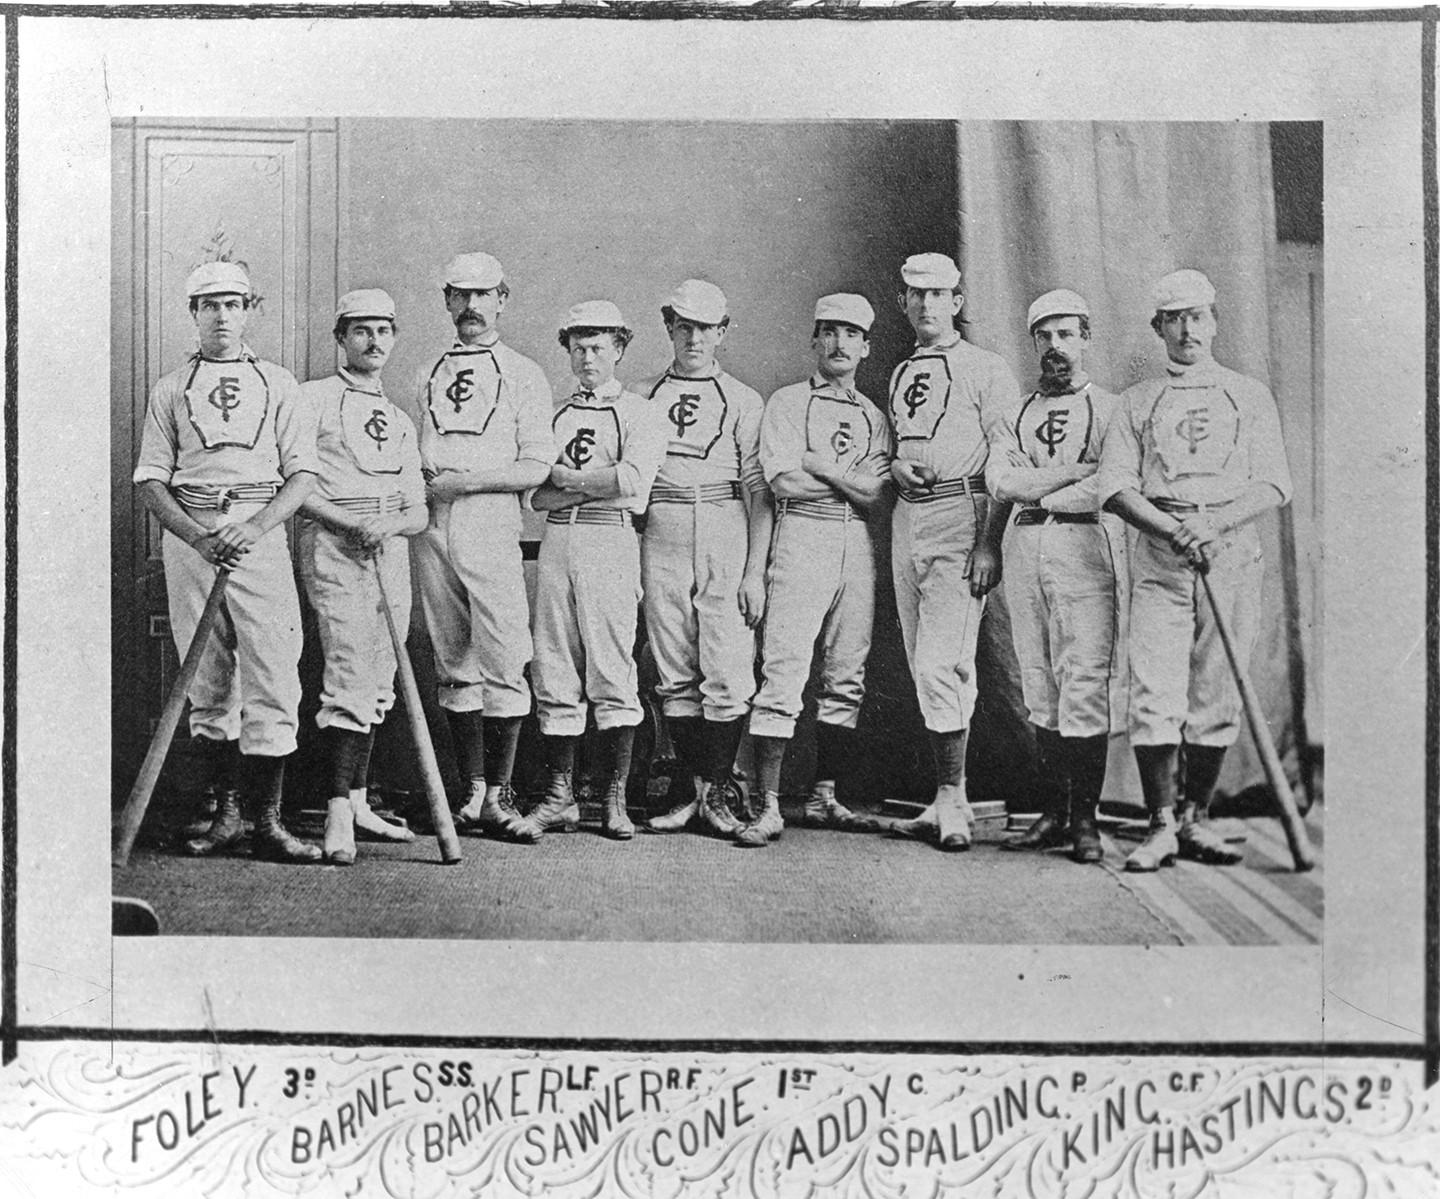 Trips by the 1869 Cincinnati team made the game famous